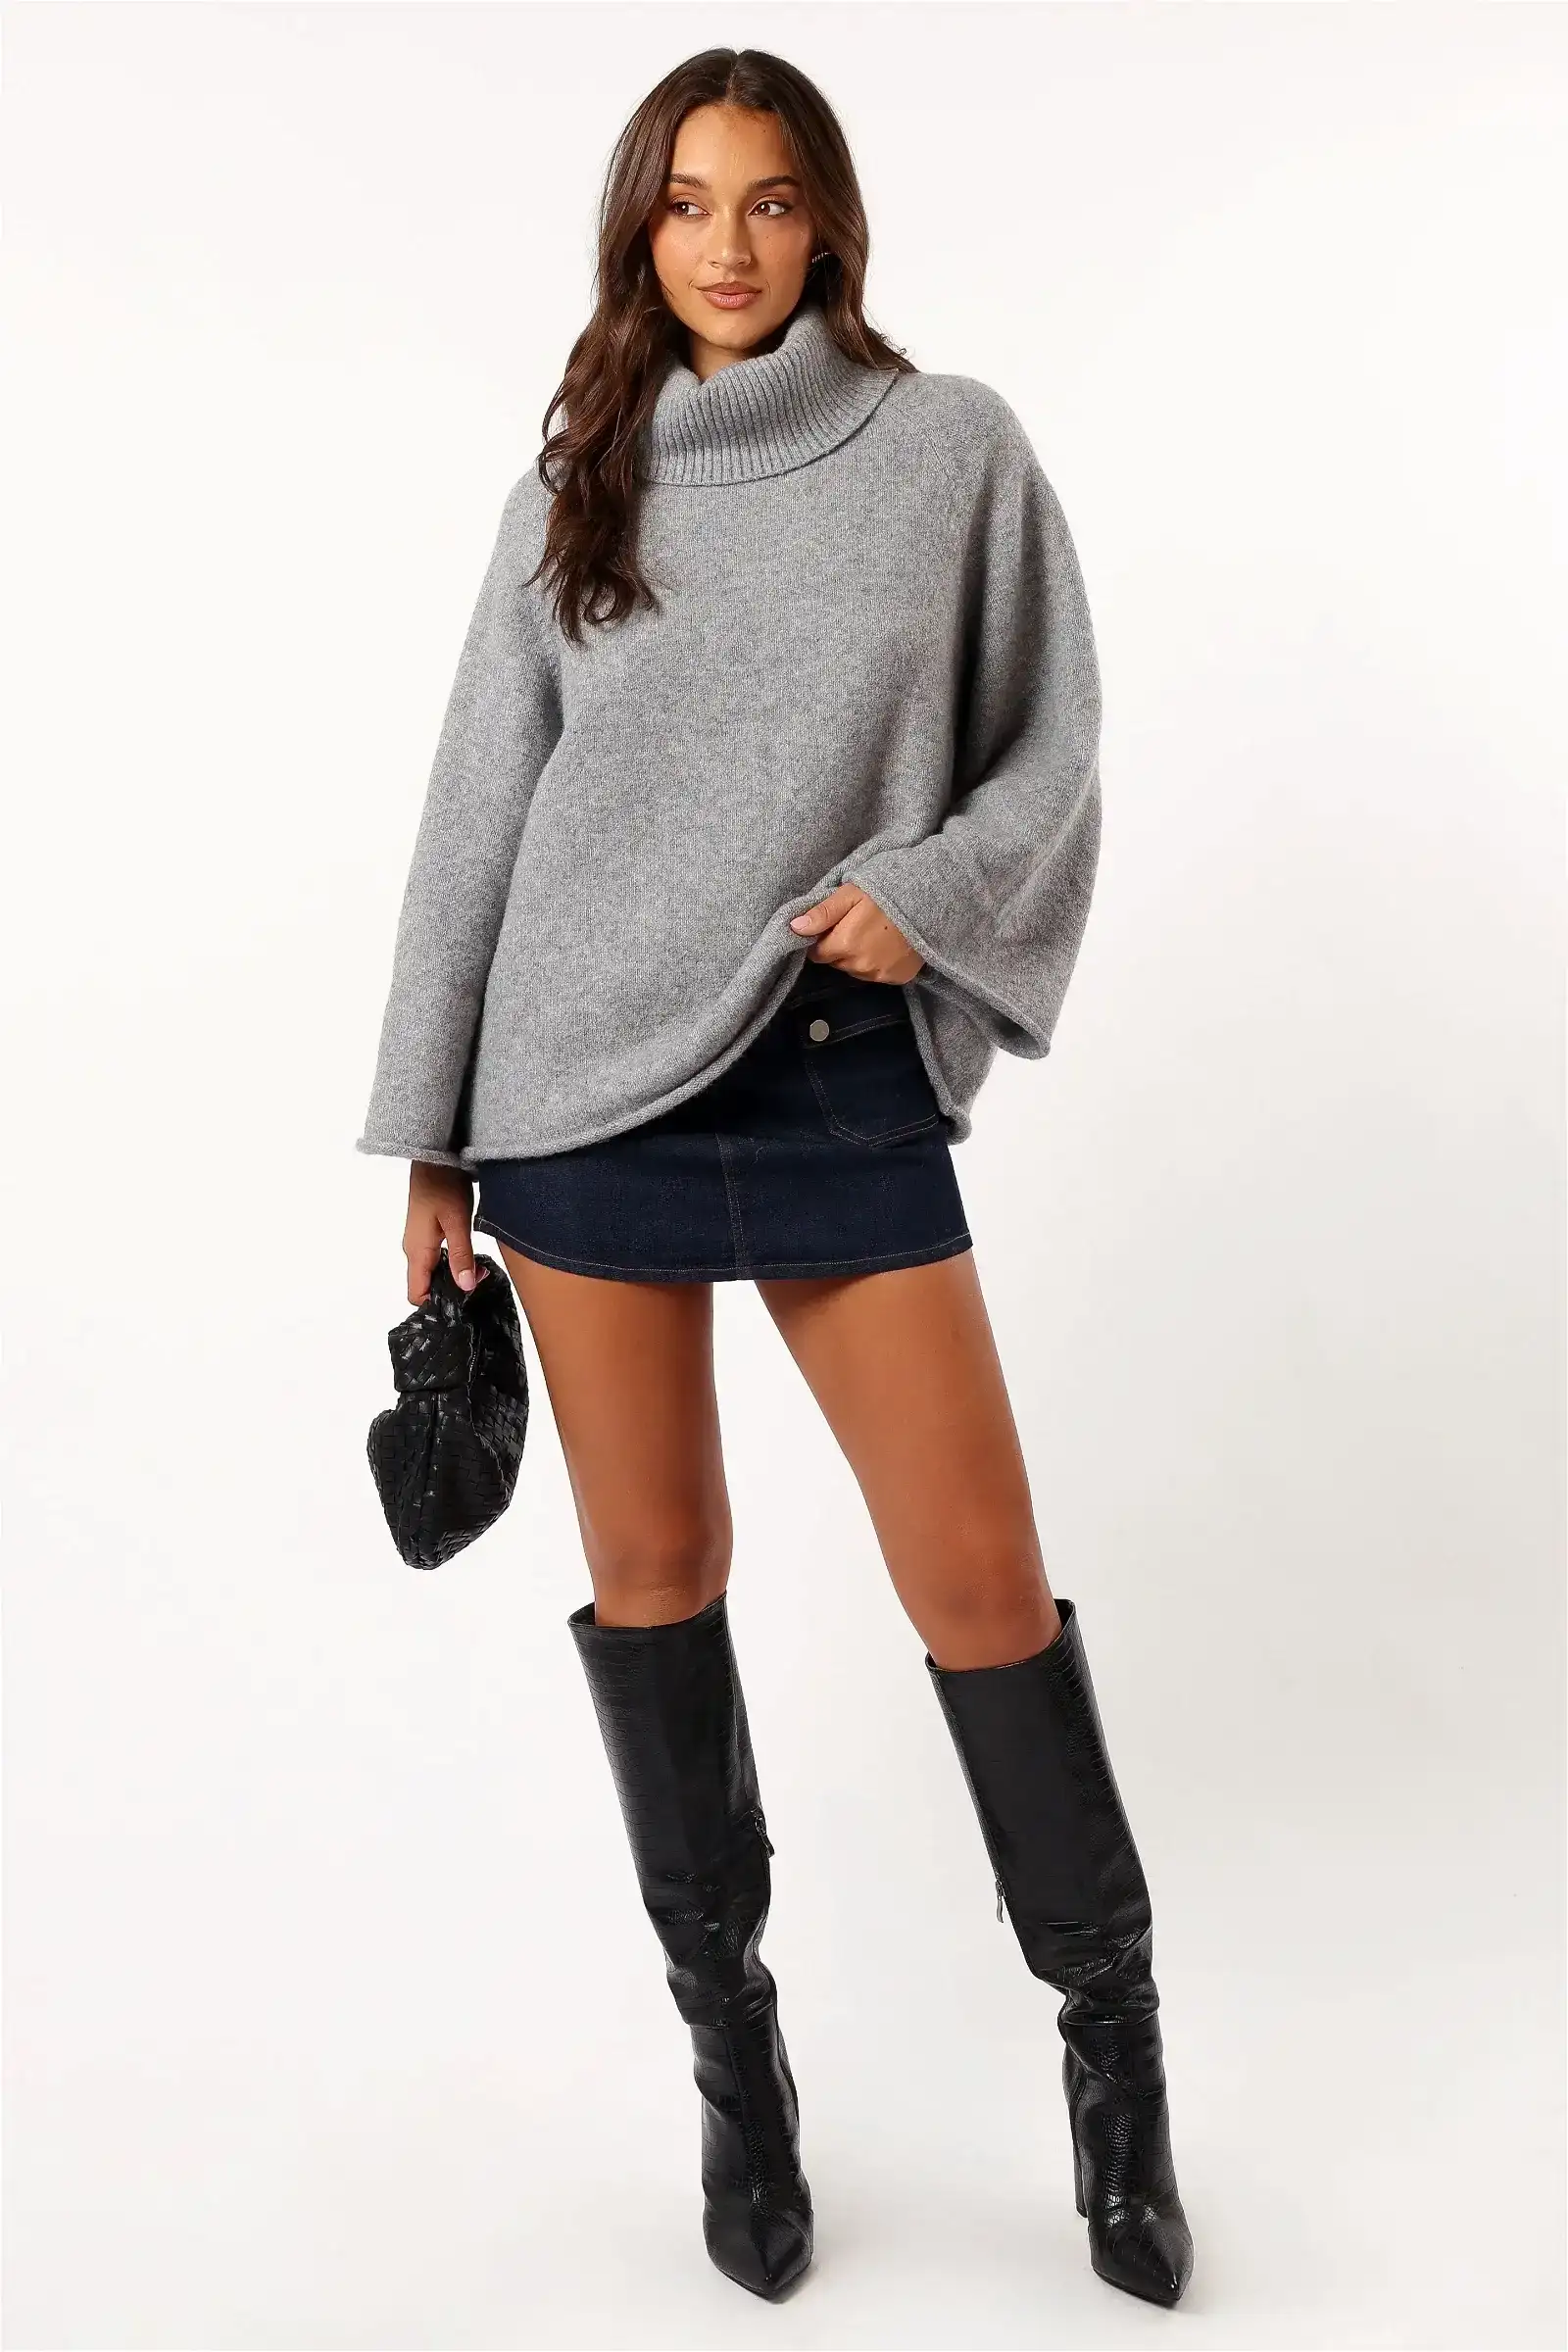 Image of Bindy Cowlneck Knit Sweater - Grey Marle